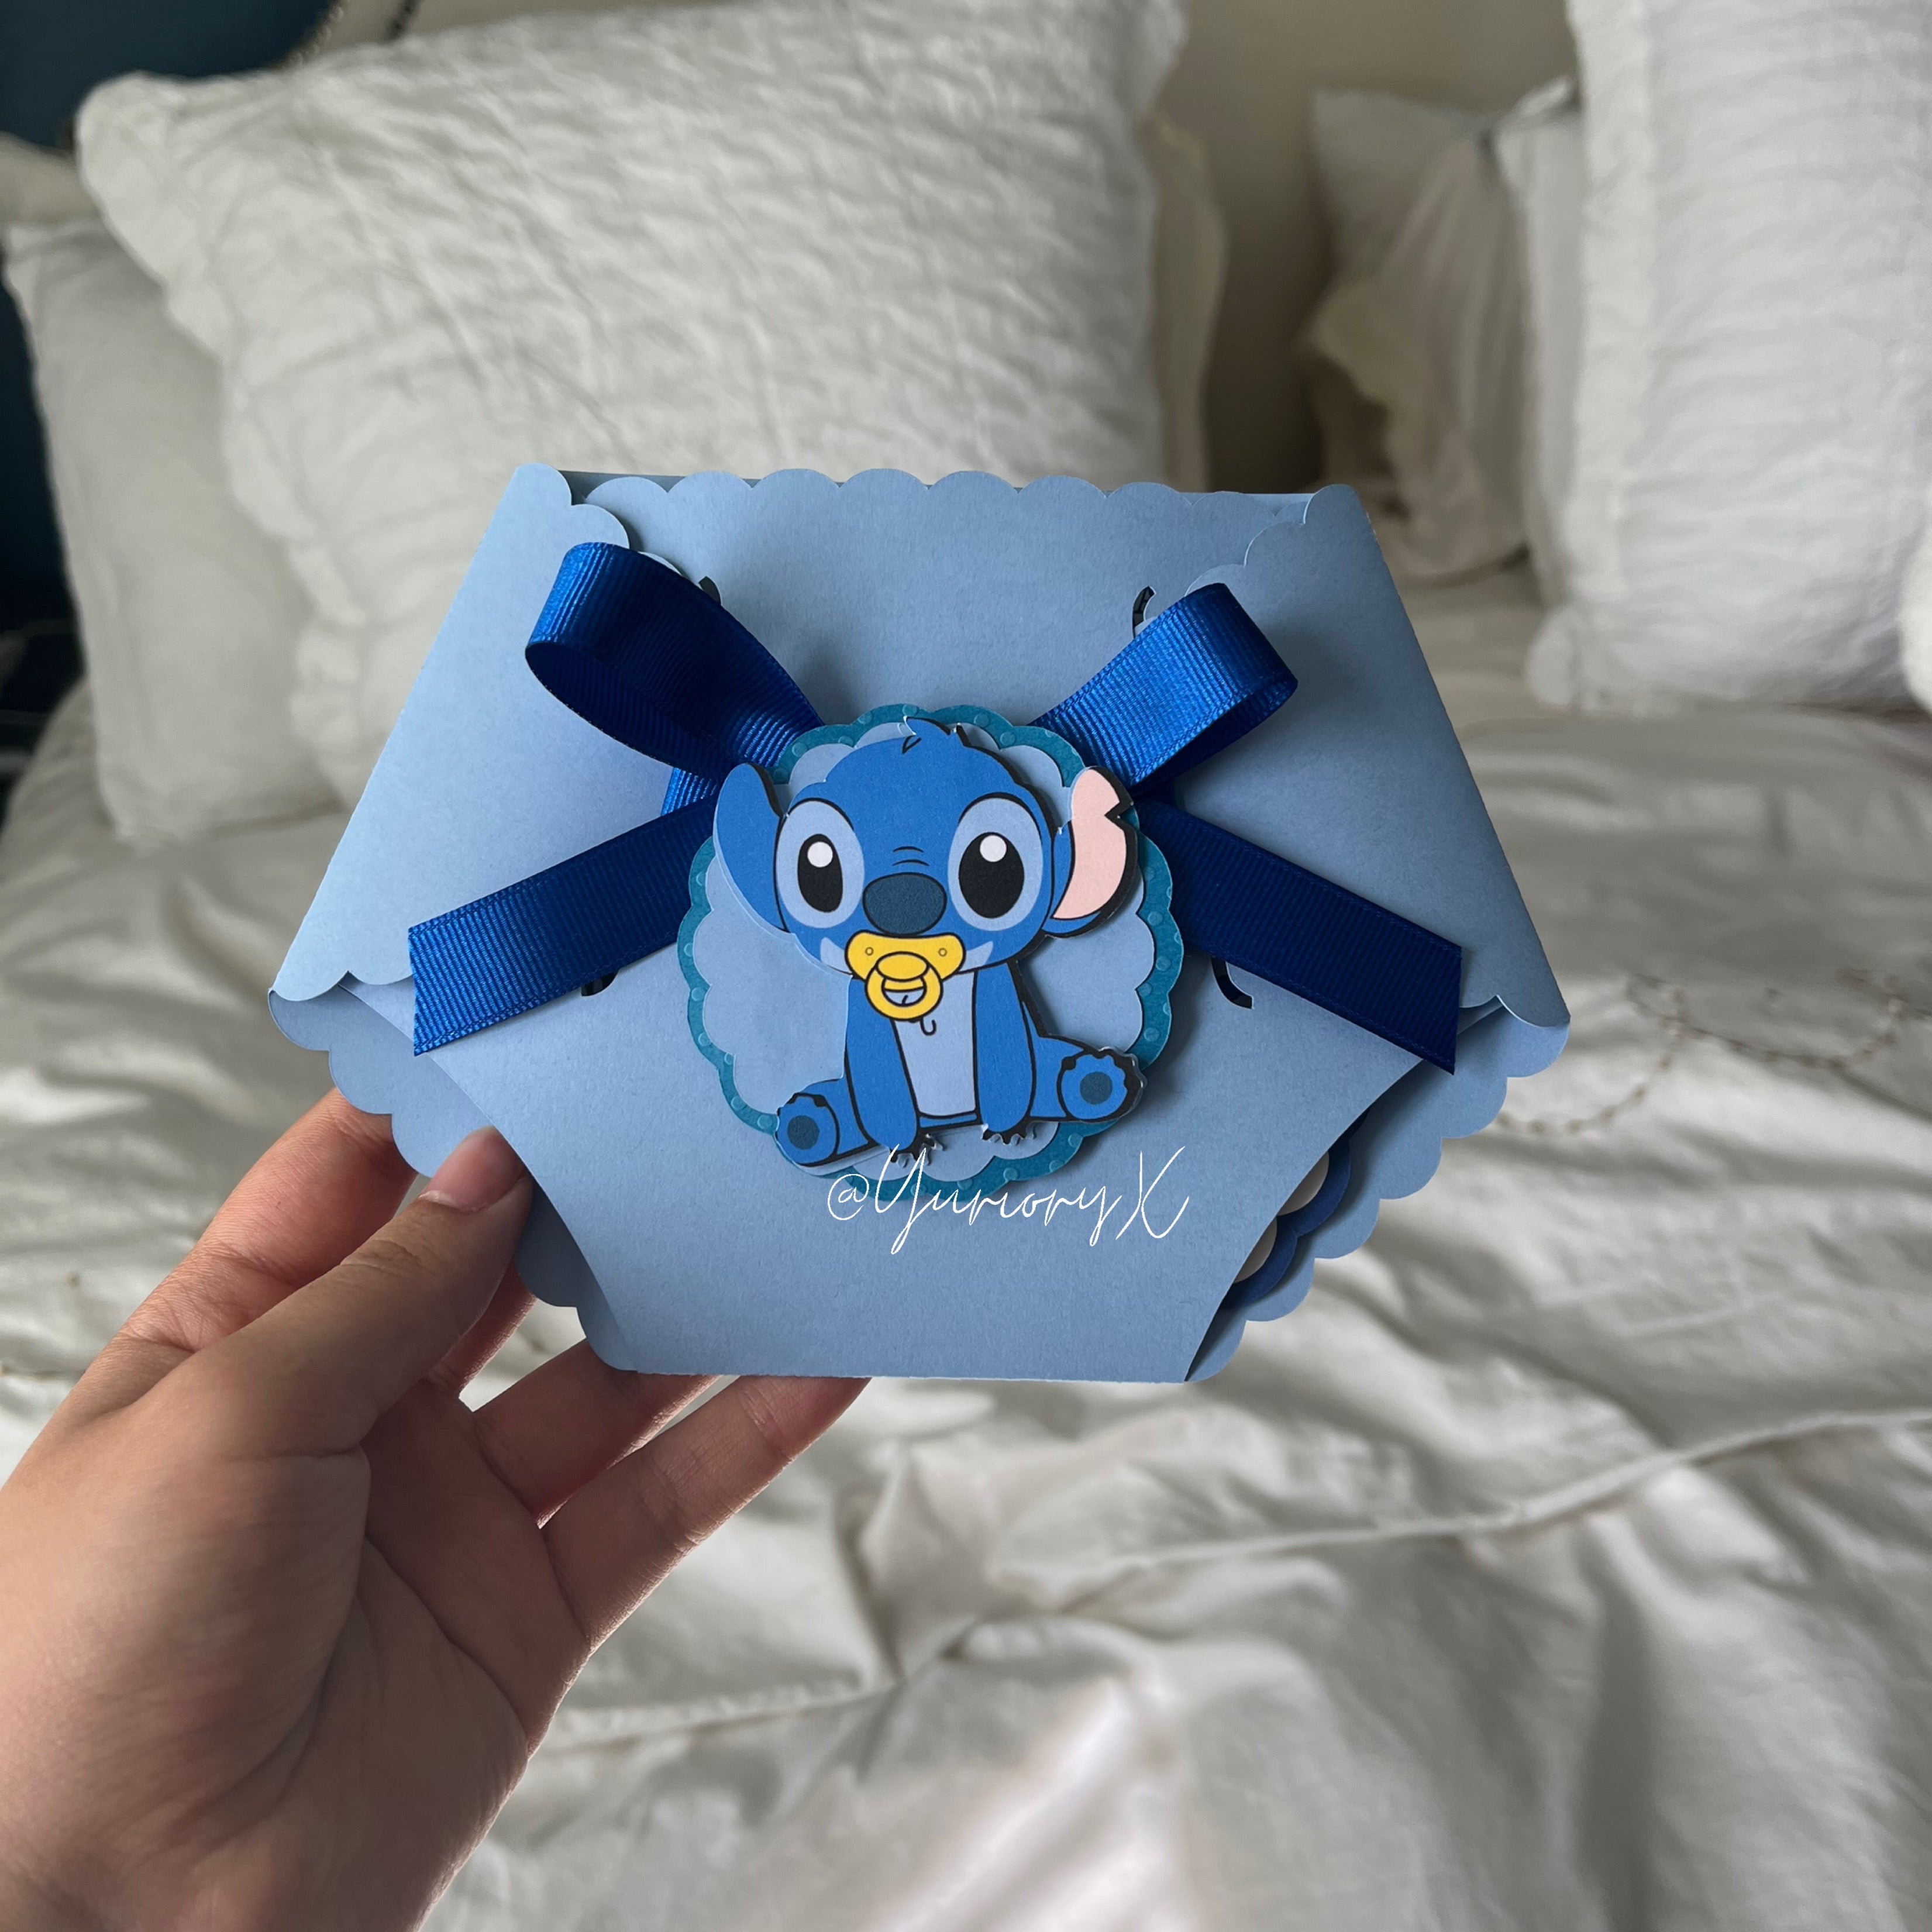 Lilo and Stitch Baby Shower Invitations + Party Ideas